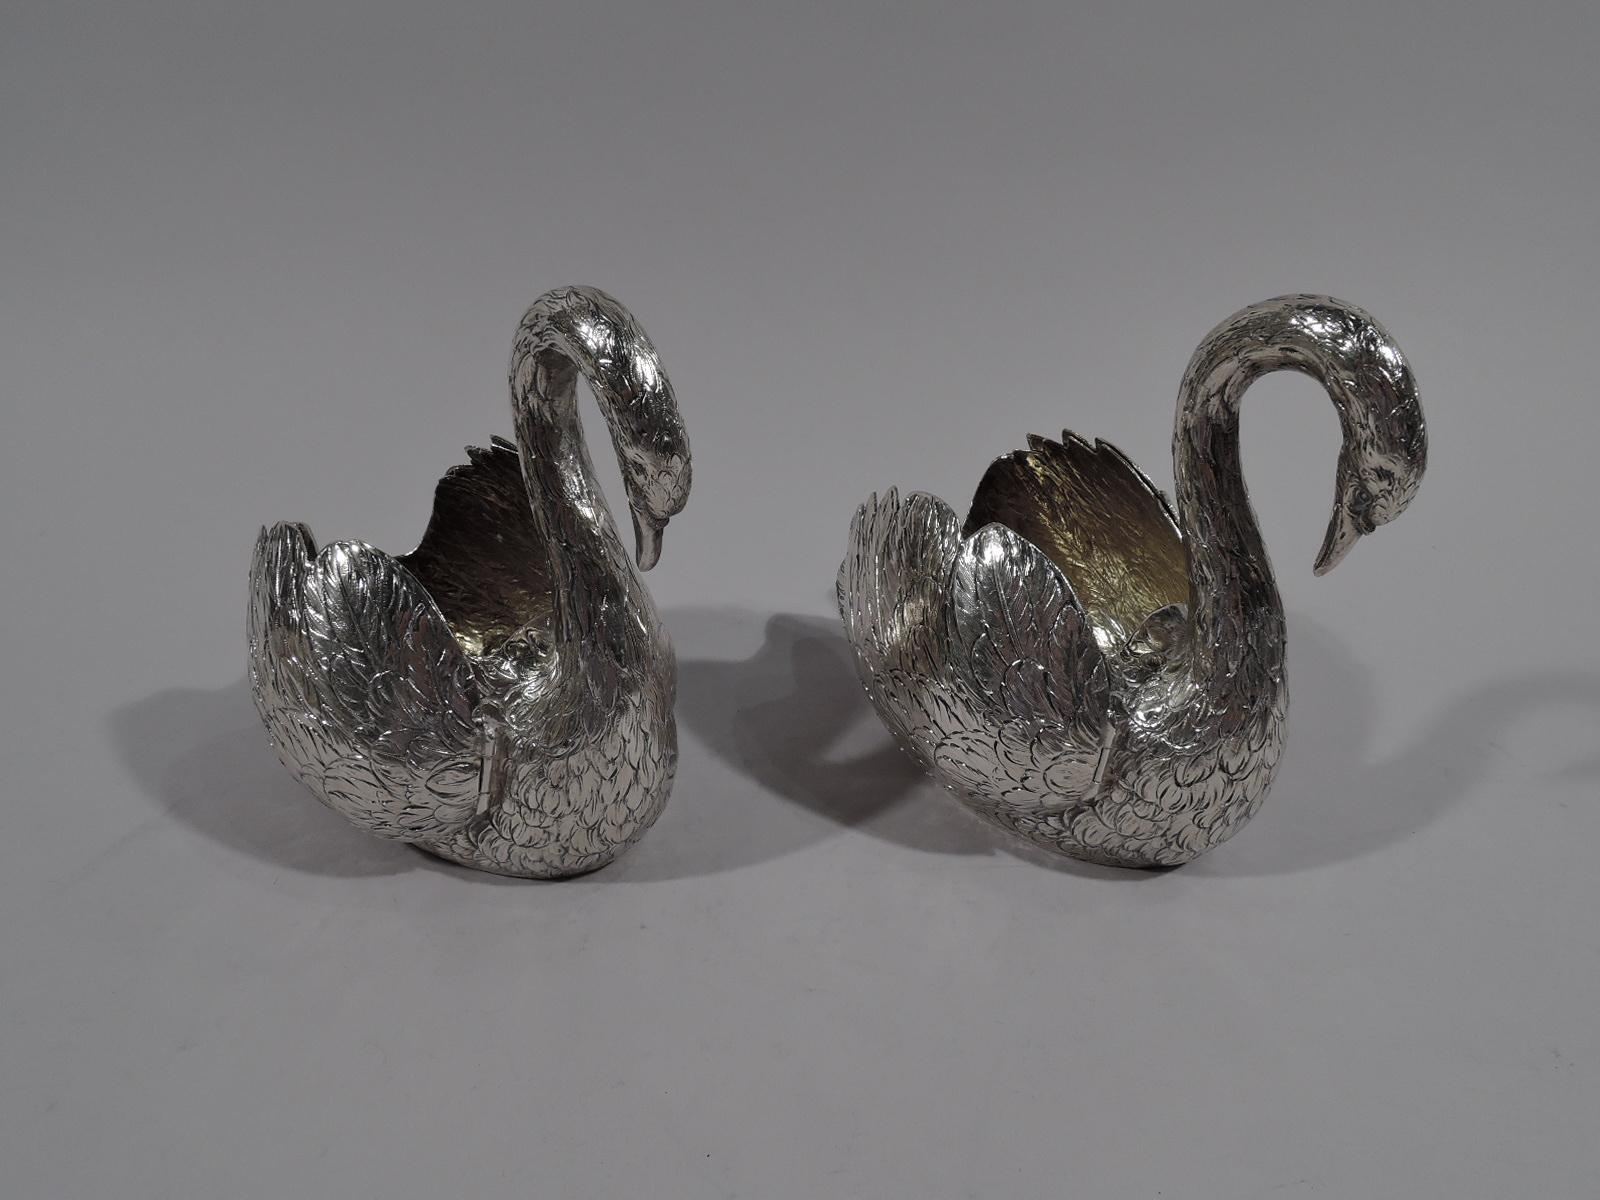 Pair of 800 silver swan bowls. Made by Karl Söhnlein & Söhne in Hanau, German, circa 1930. Each: Round downy bodies with hinged wings and graceful scroll necks. Interior gilt washed. Elegant table ornaments that can filled with treats. Fully